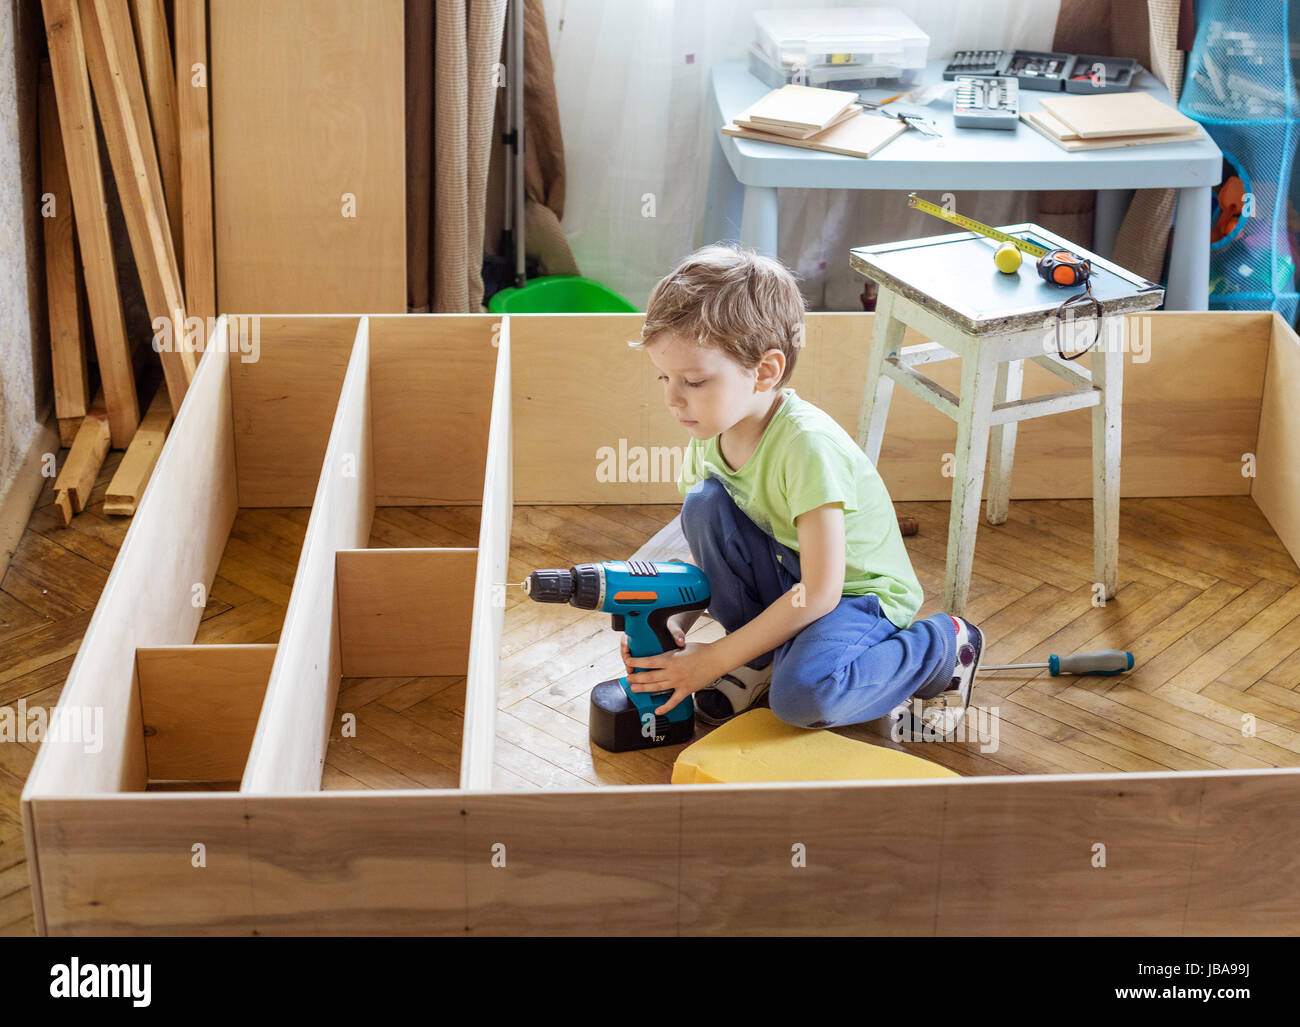 Cute young boy holding screwdriver while sitting on floor at unfinished shelf unit or bookcase Stock Photo